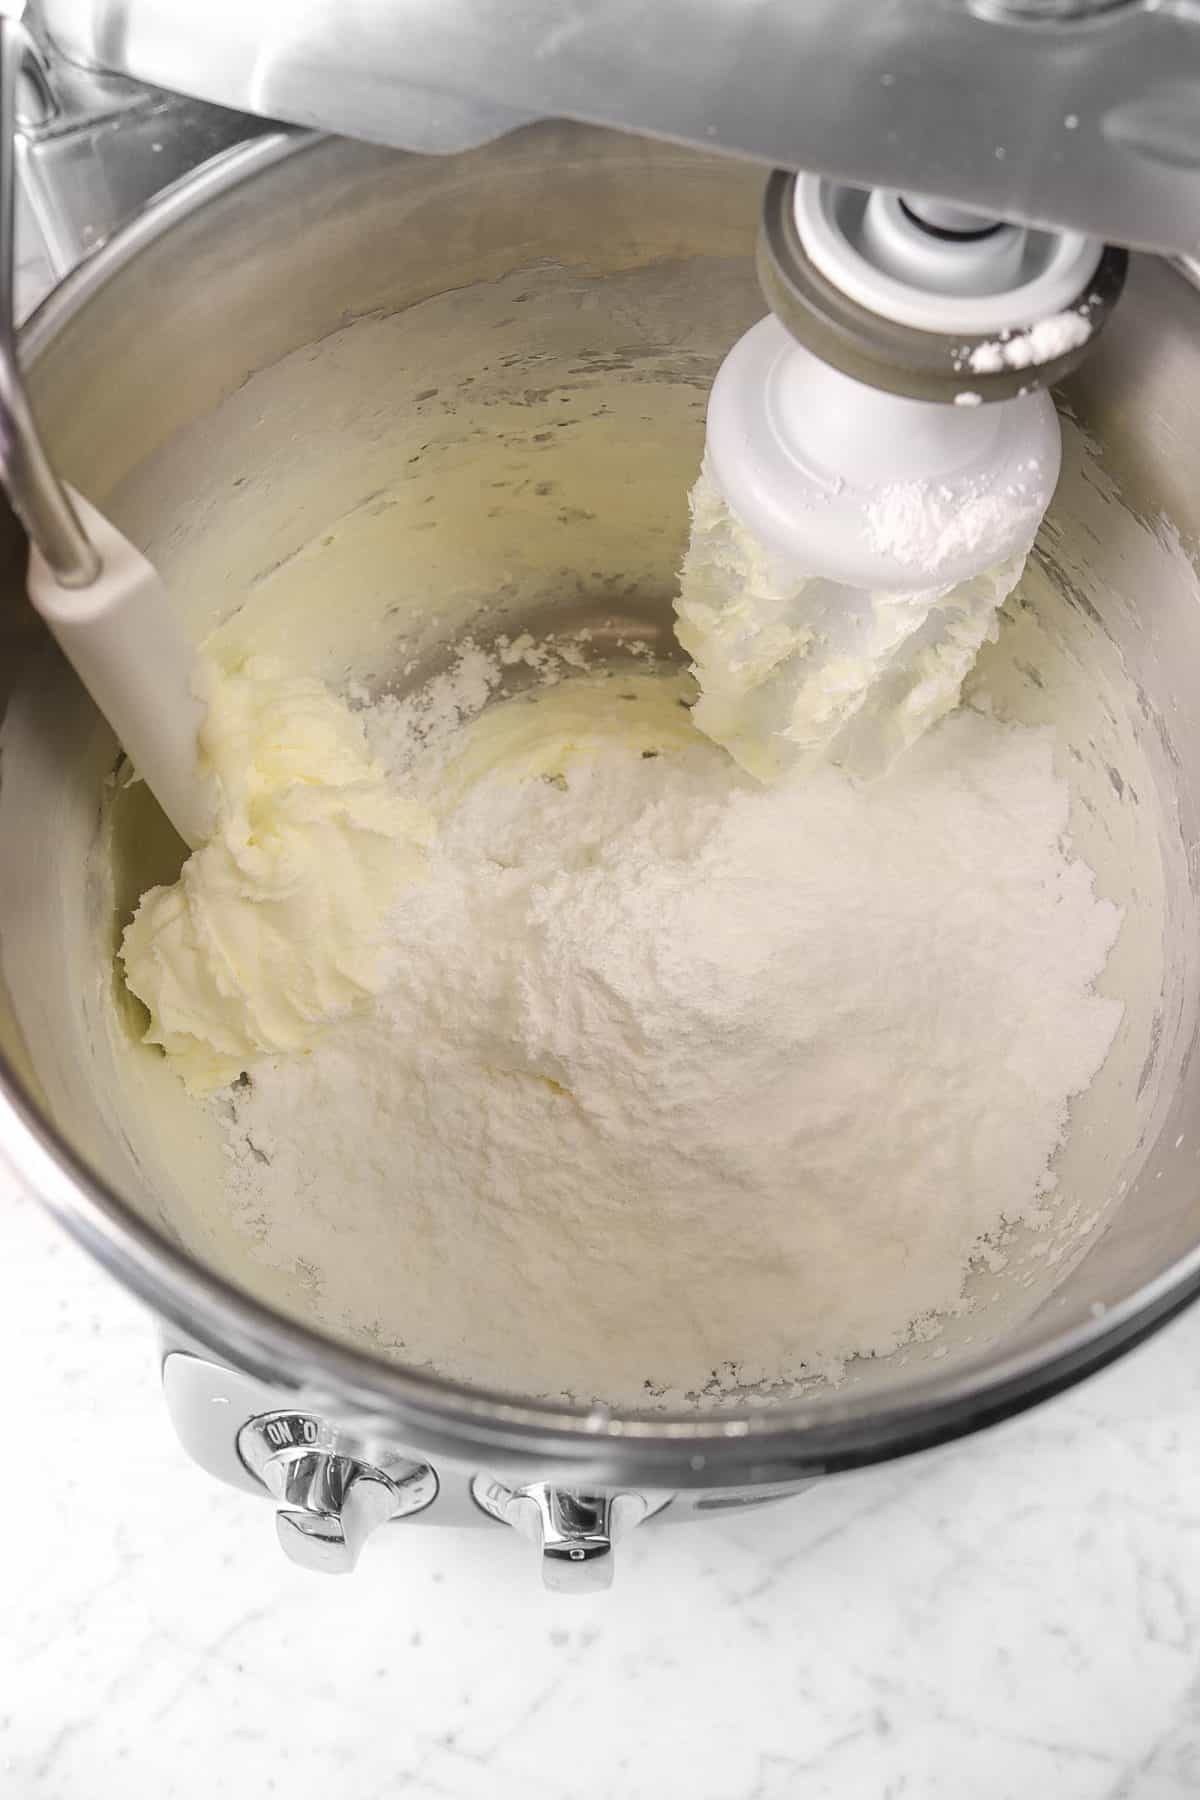 butter and powdered sugar in a mixer